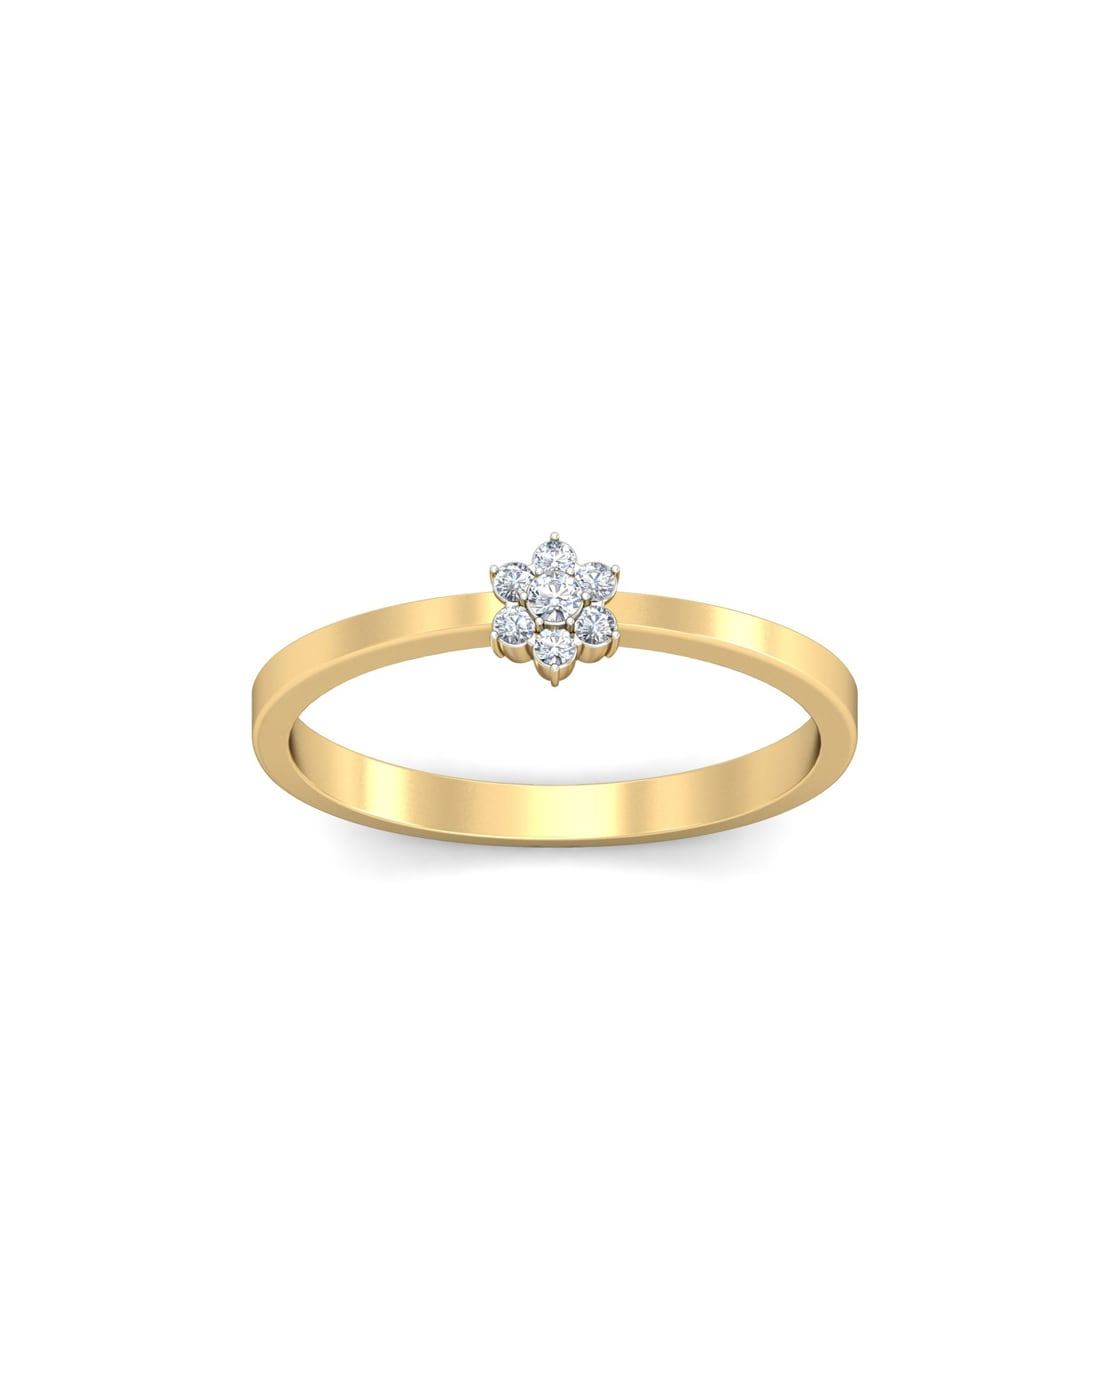 Bedazzled Soulful Diamond Ring